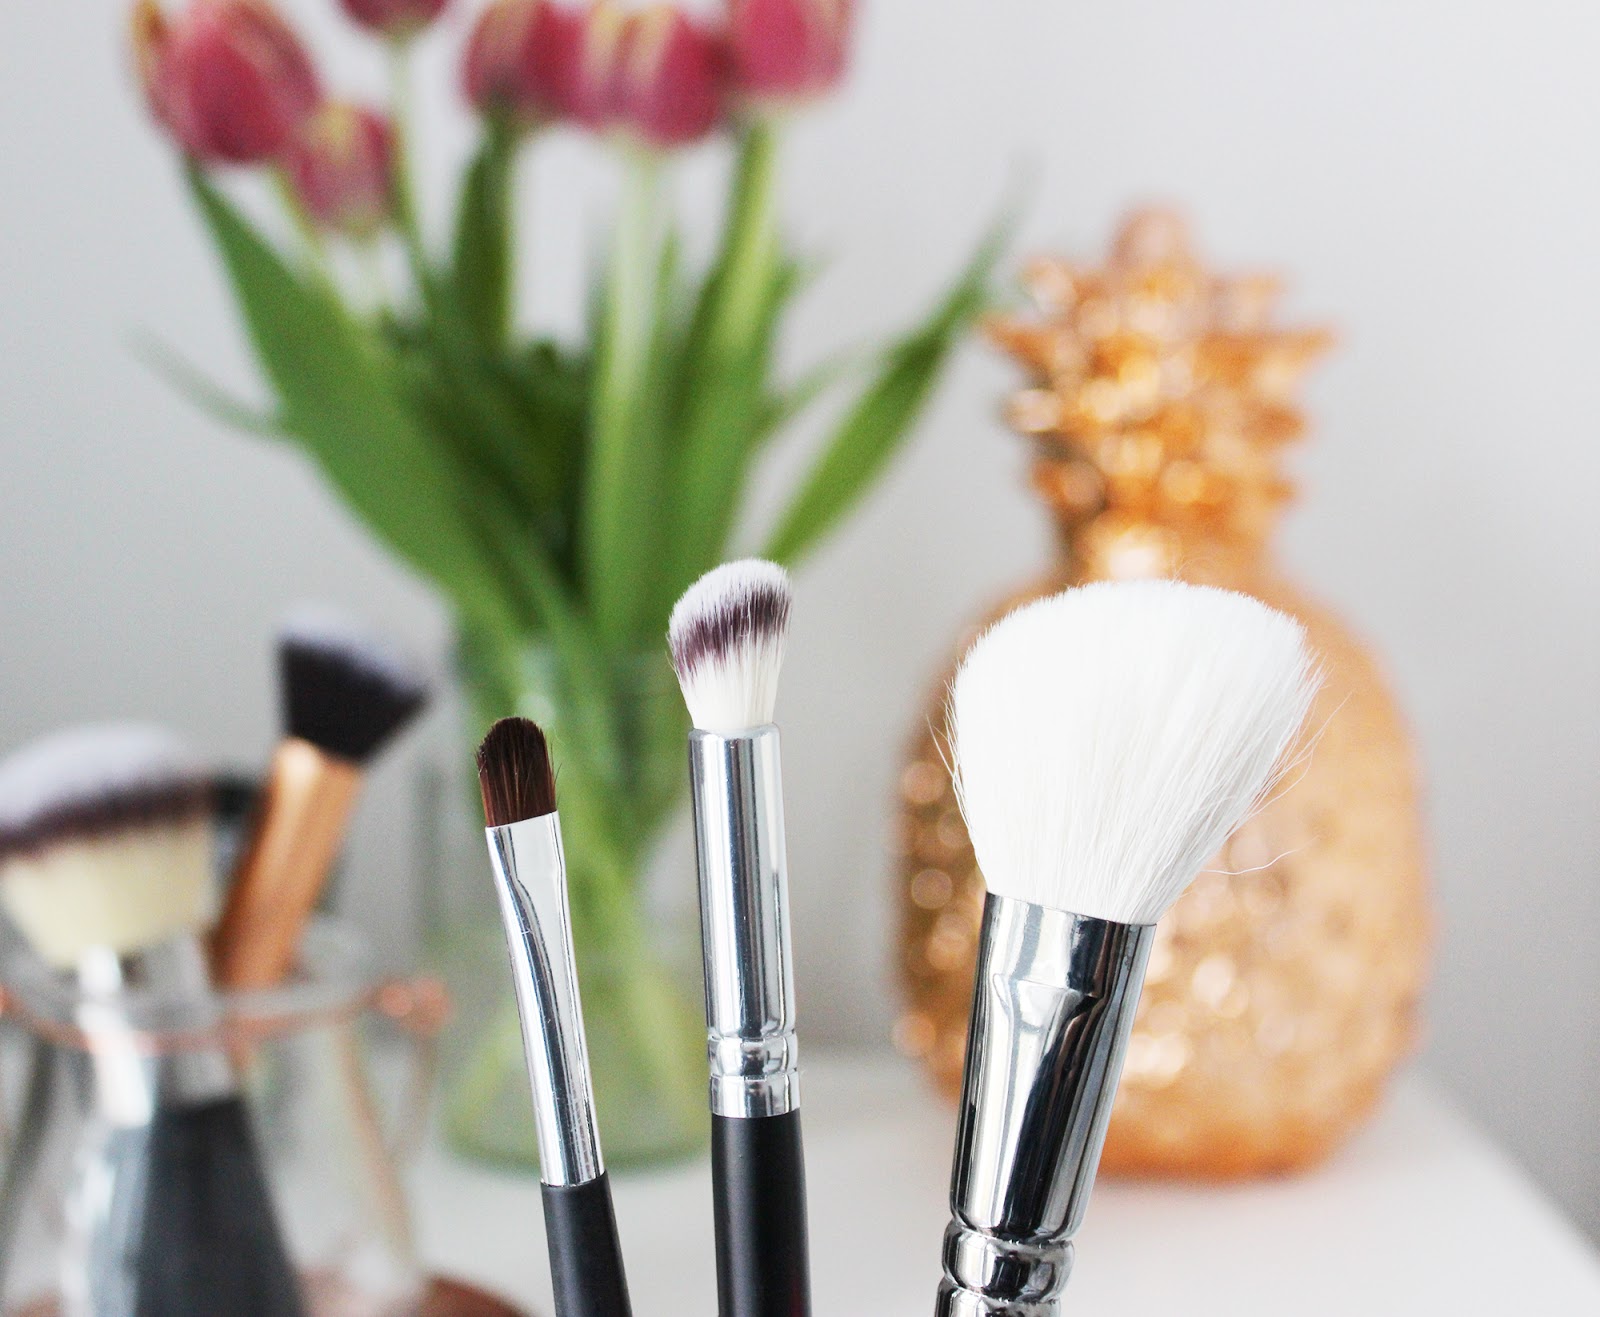 5 affordable makeup brushes from Zoeva, Real Techniques, Crownbrush, IT cosmetics